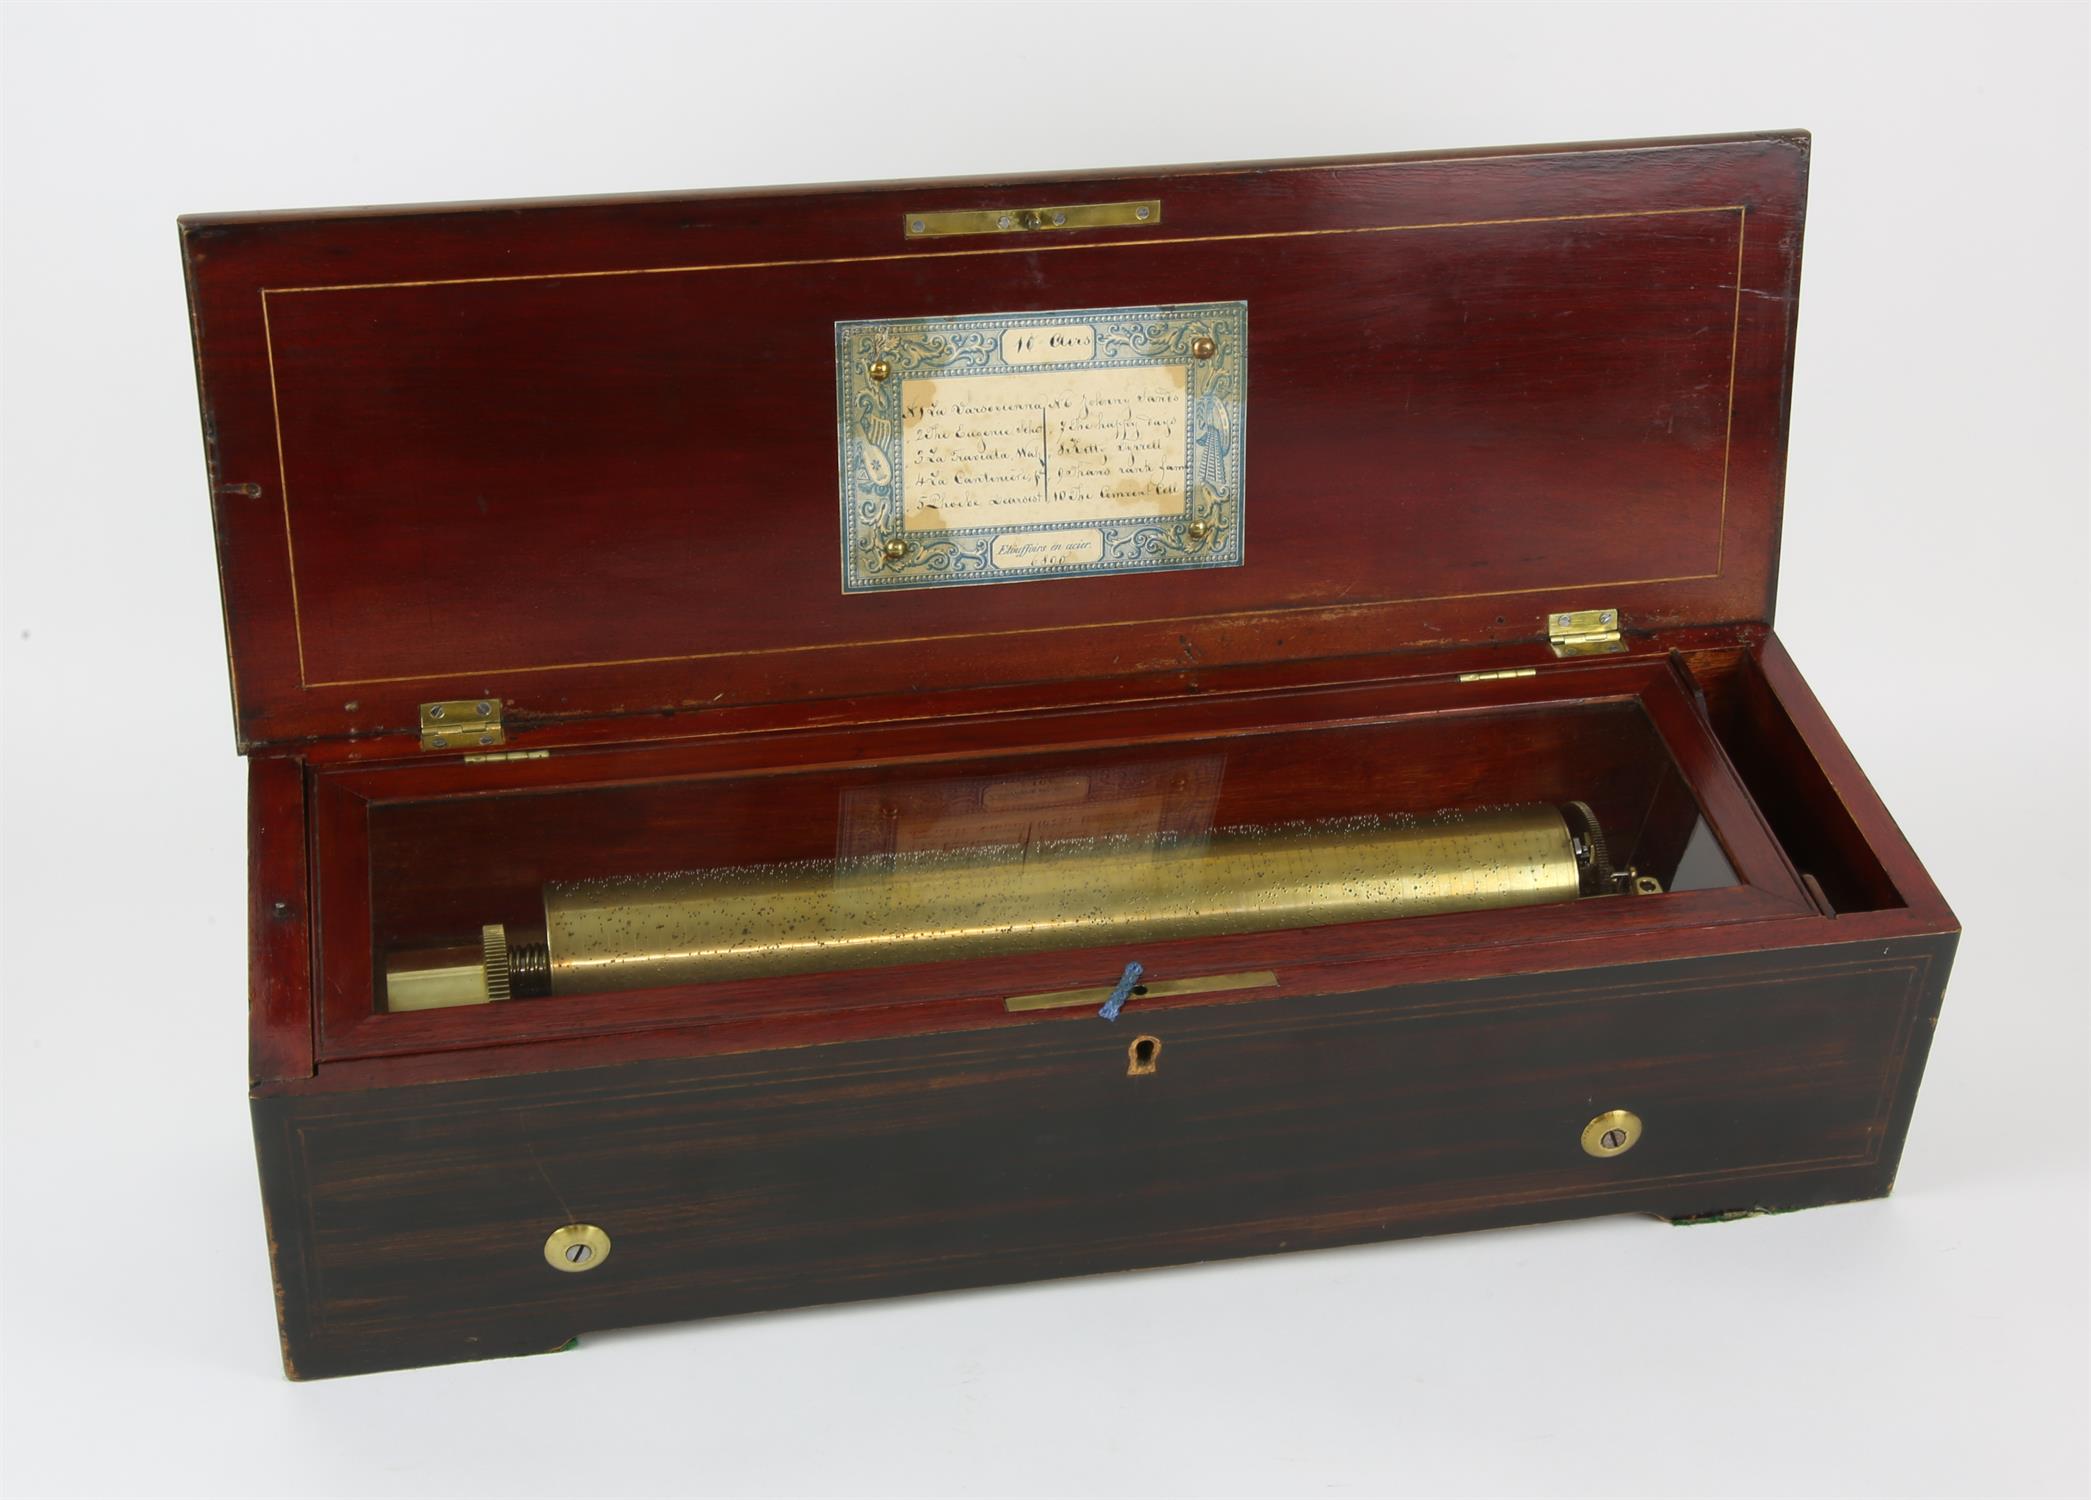 19th century Swiss rosewood and marquetry inlaid cylinder music box, label to underside of cover